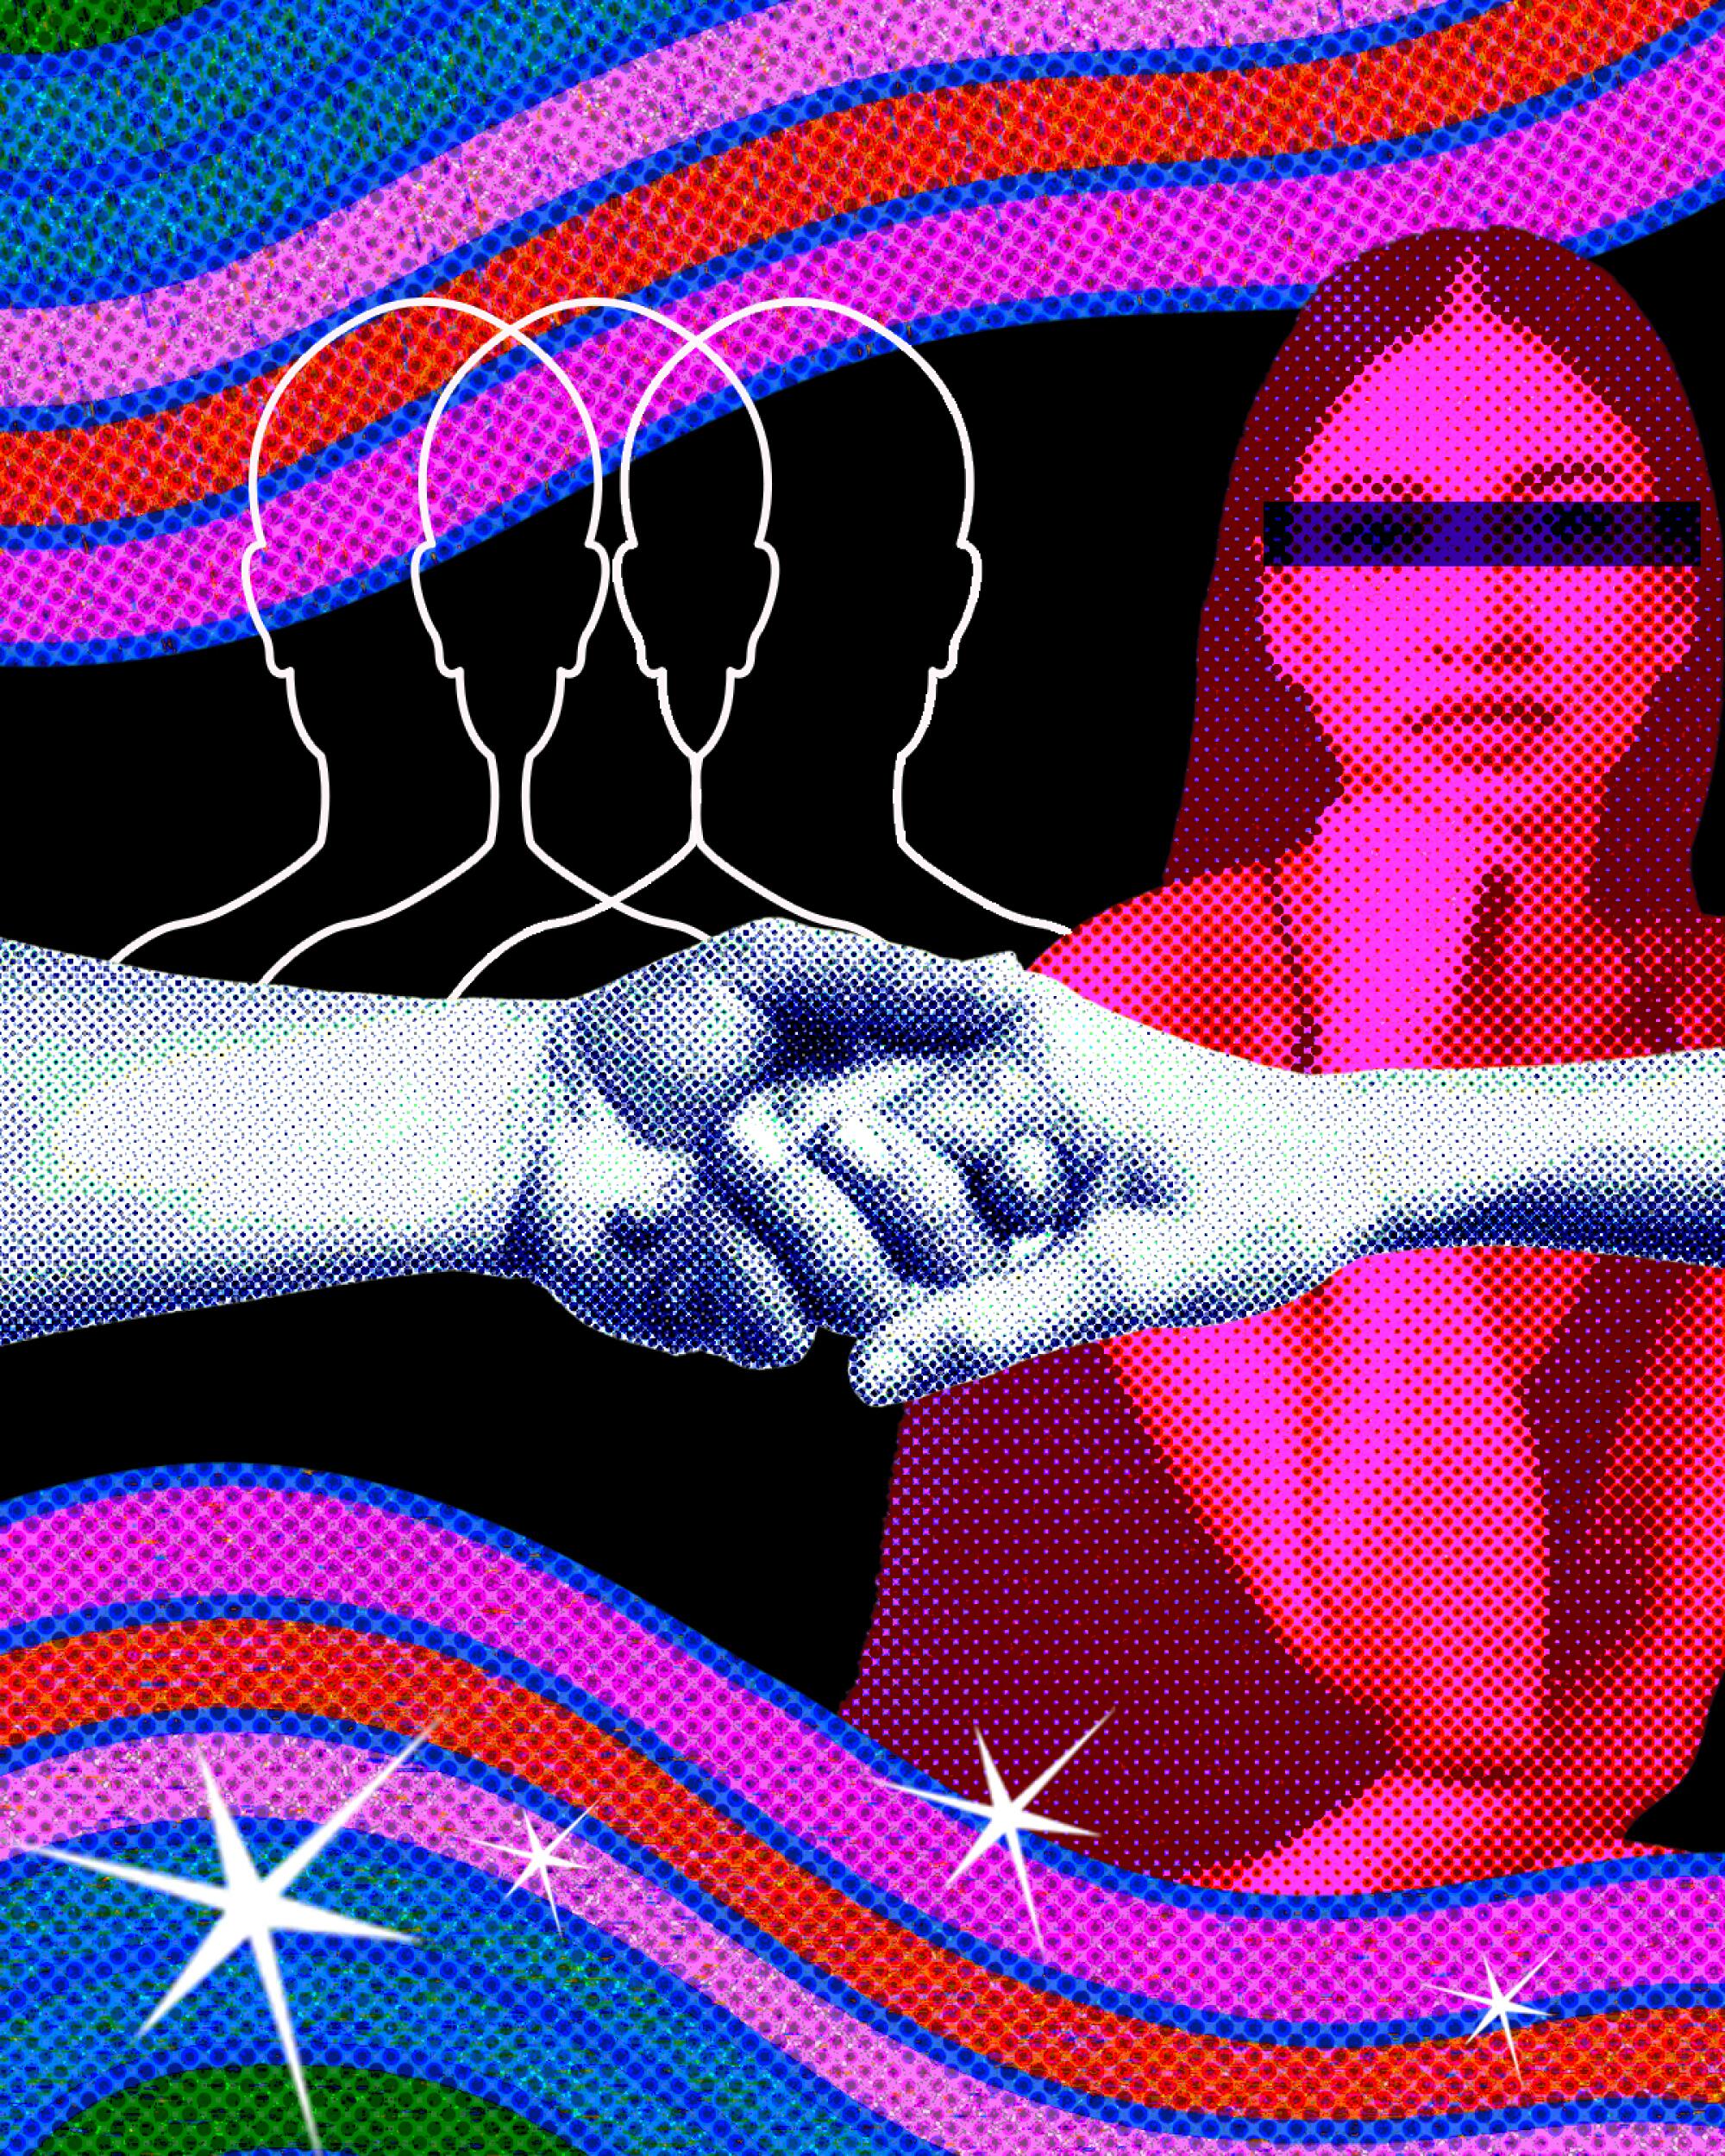 A multicolored photo illustration of holding hands, overlapping outlines of heads, and a woman with a black bar over her eyes